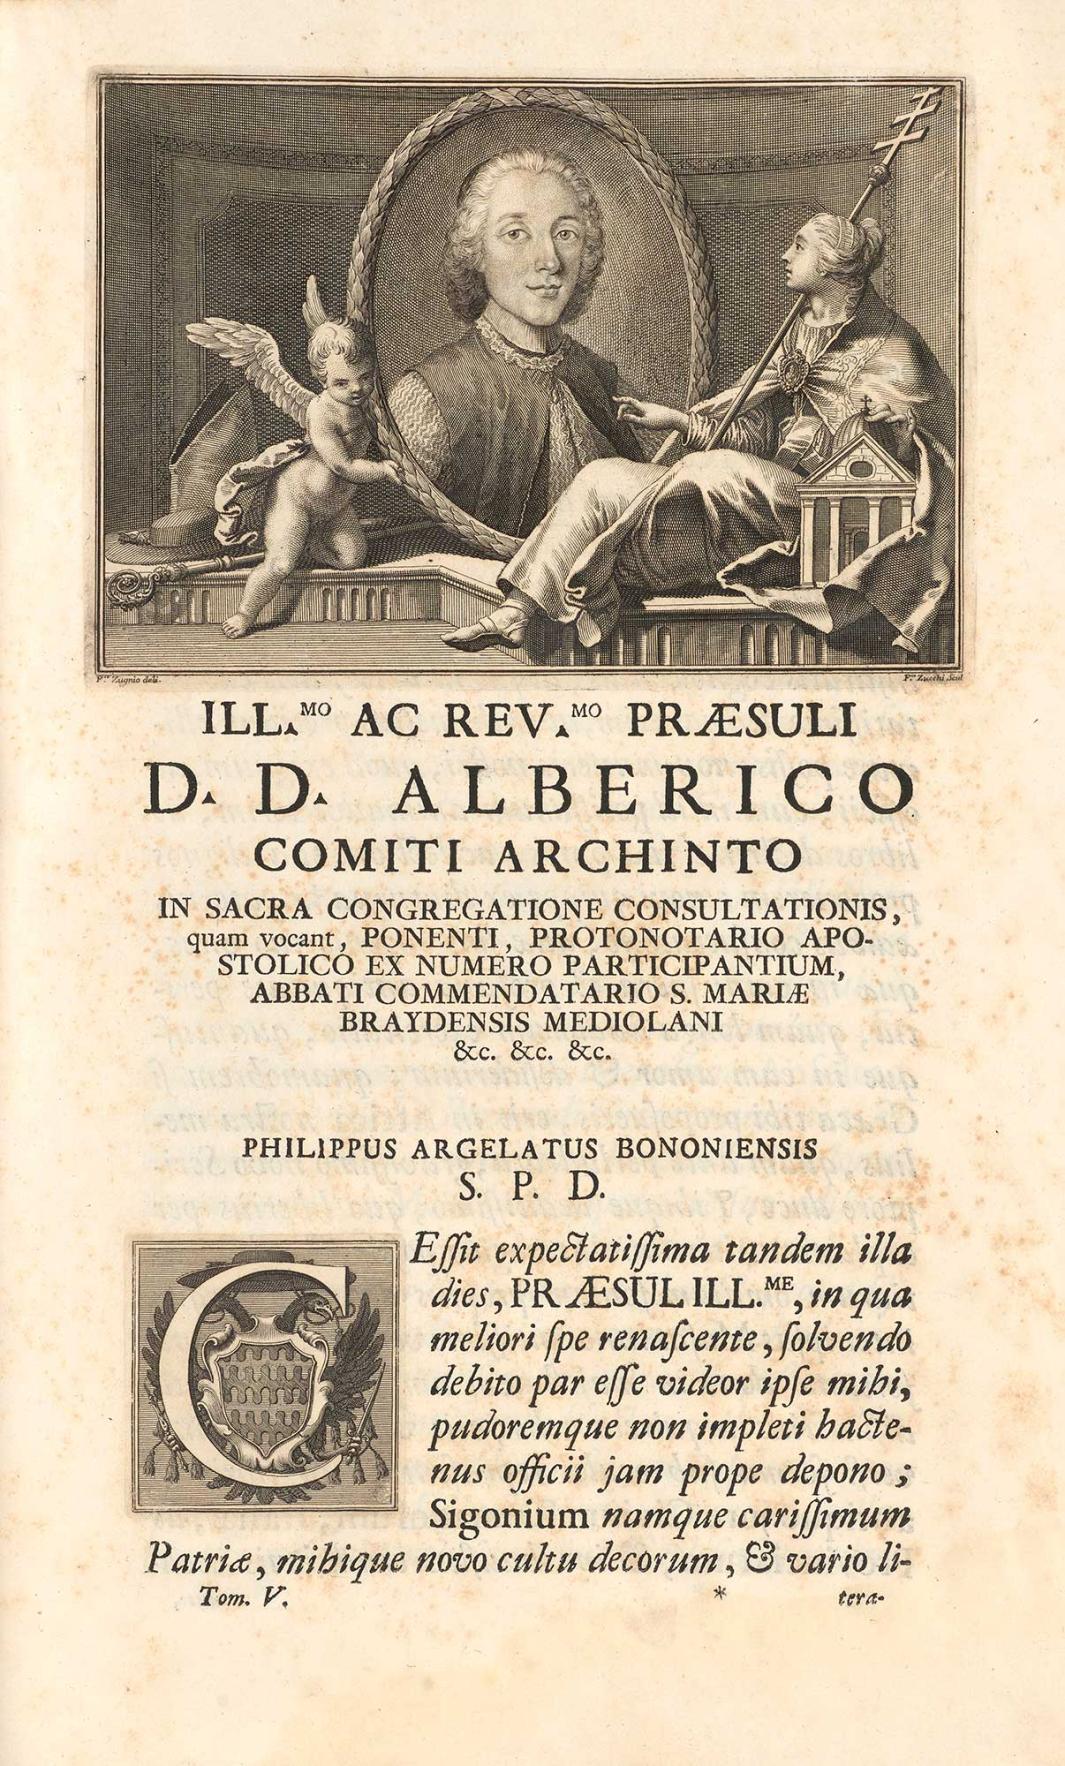 Frontispiece of a book.